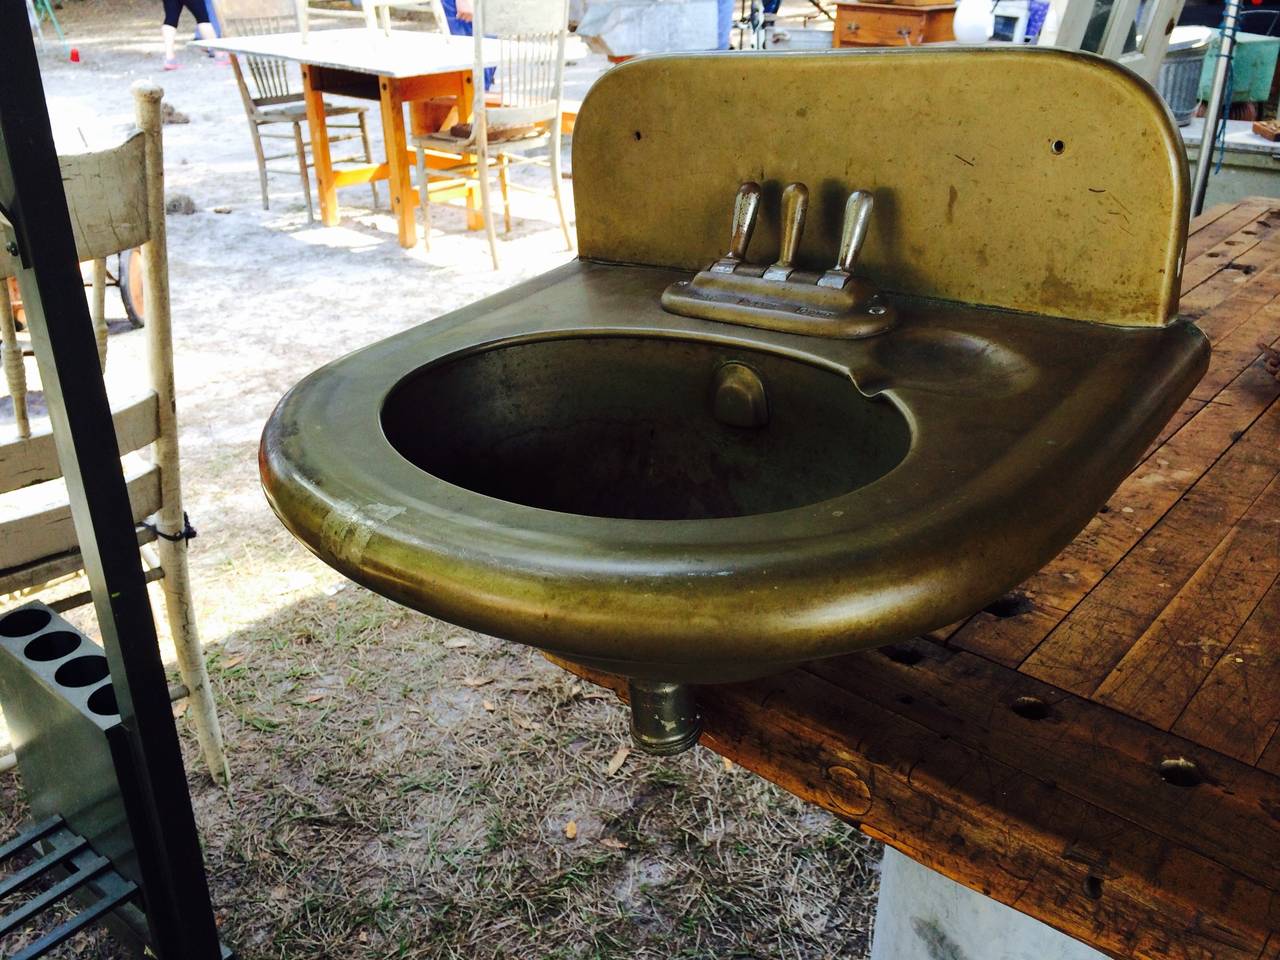 Railroad car, solid brass sink, circa 1910. Fully functional sink sized small to fit a railroad sleeper car. Beautiful piece of railroad memorabilia that still functions nicely for small bathroom, washroom, potting shed, planter. Feeder pipes are in